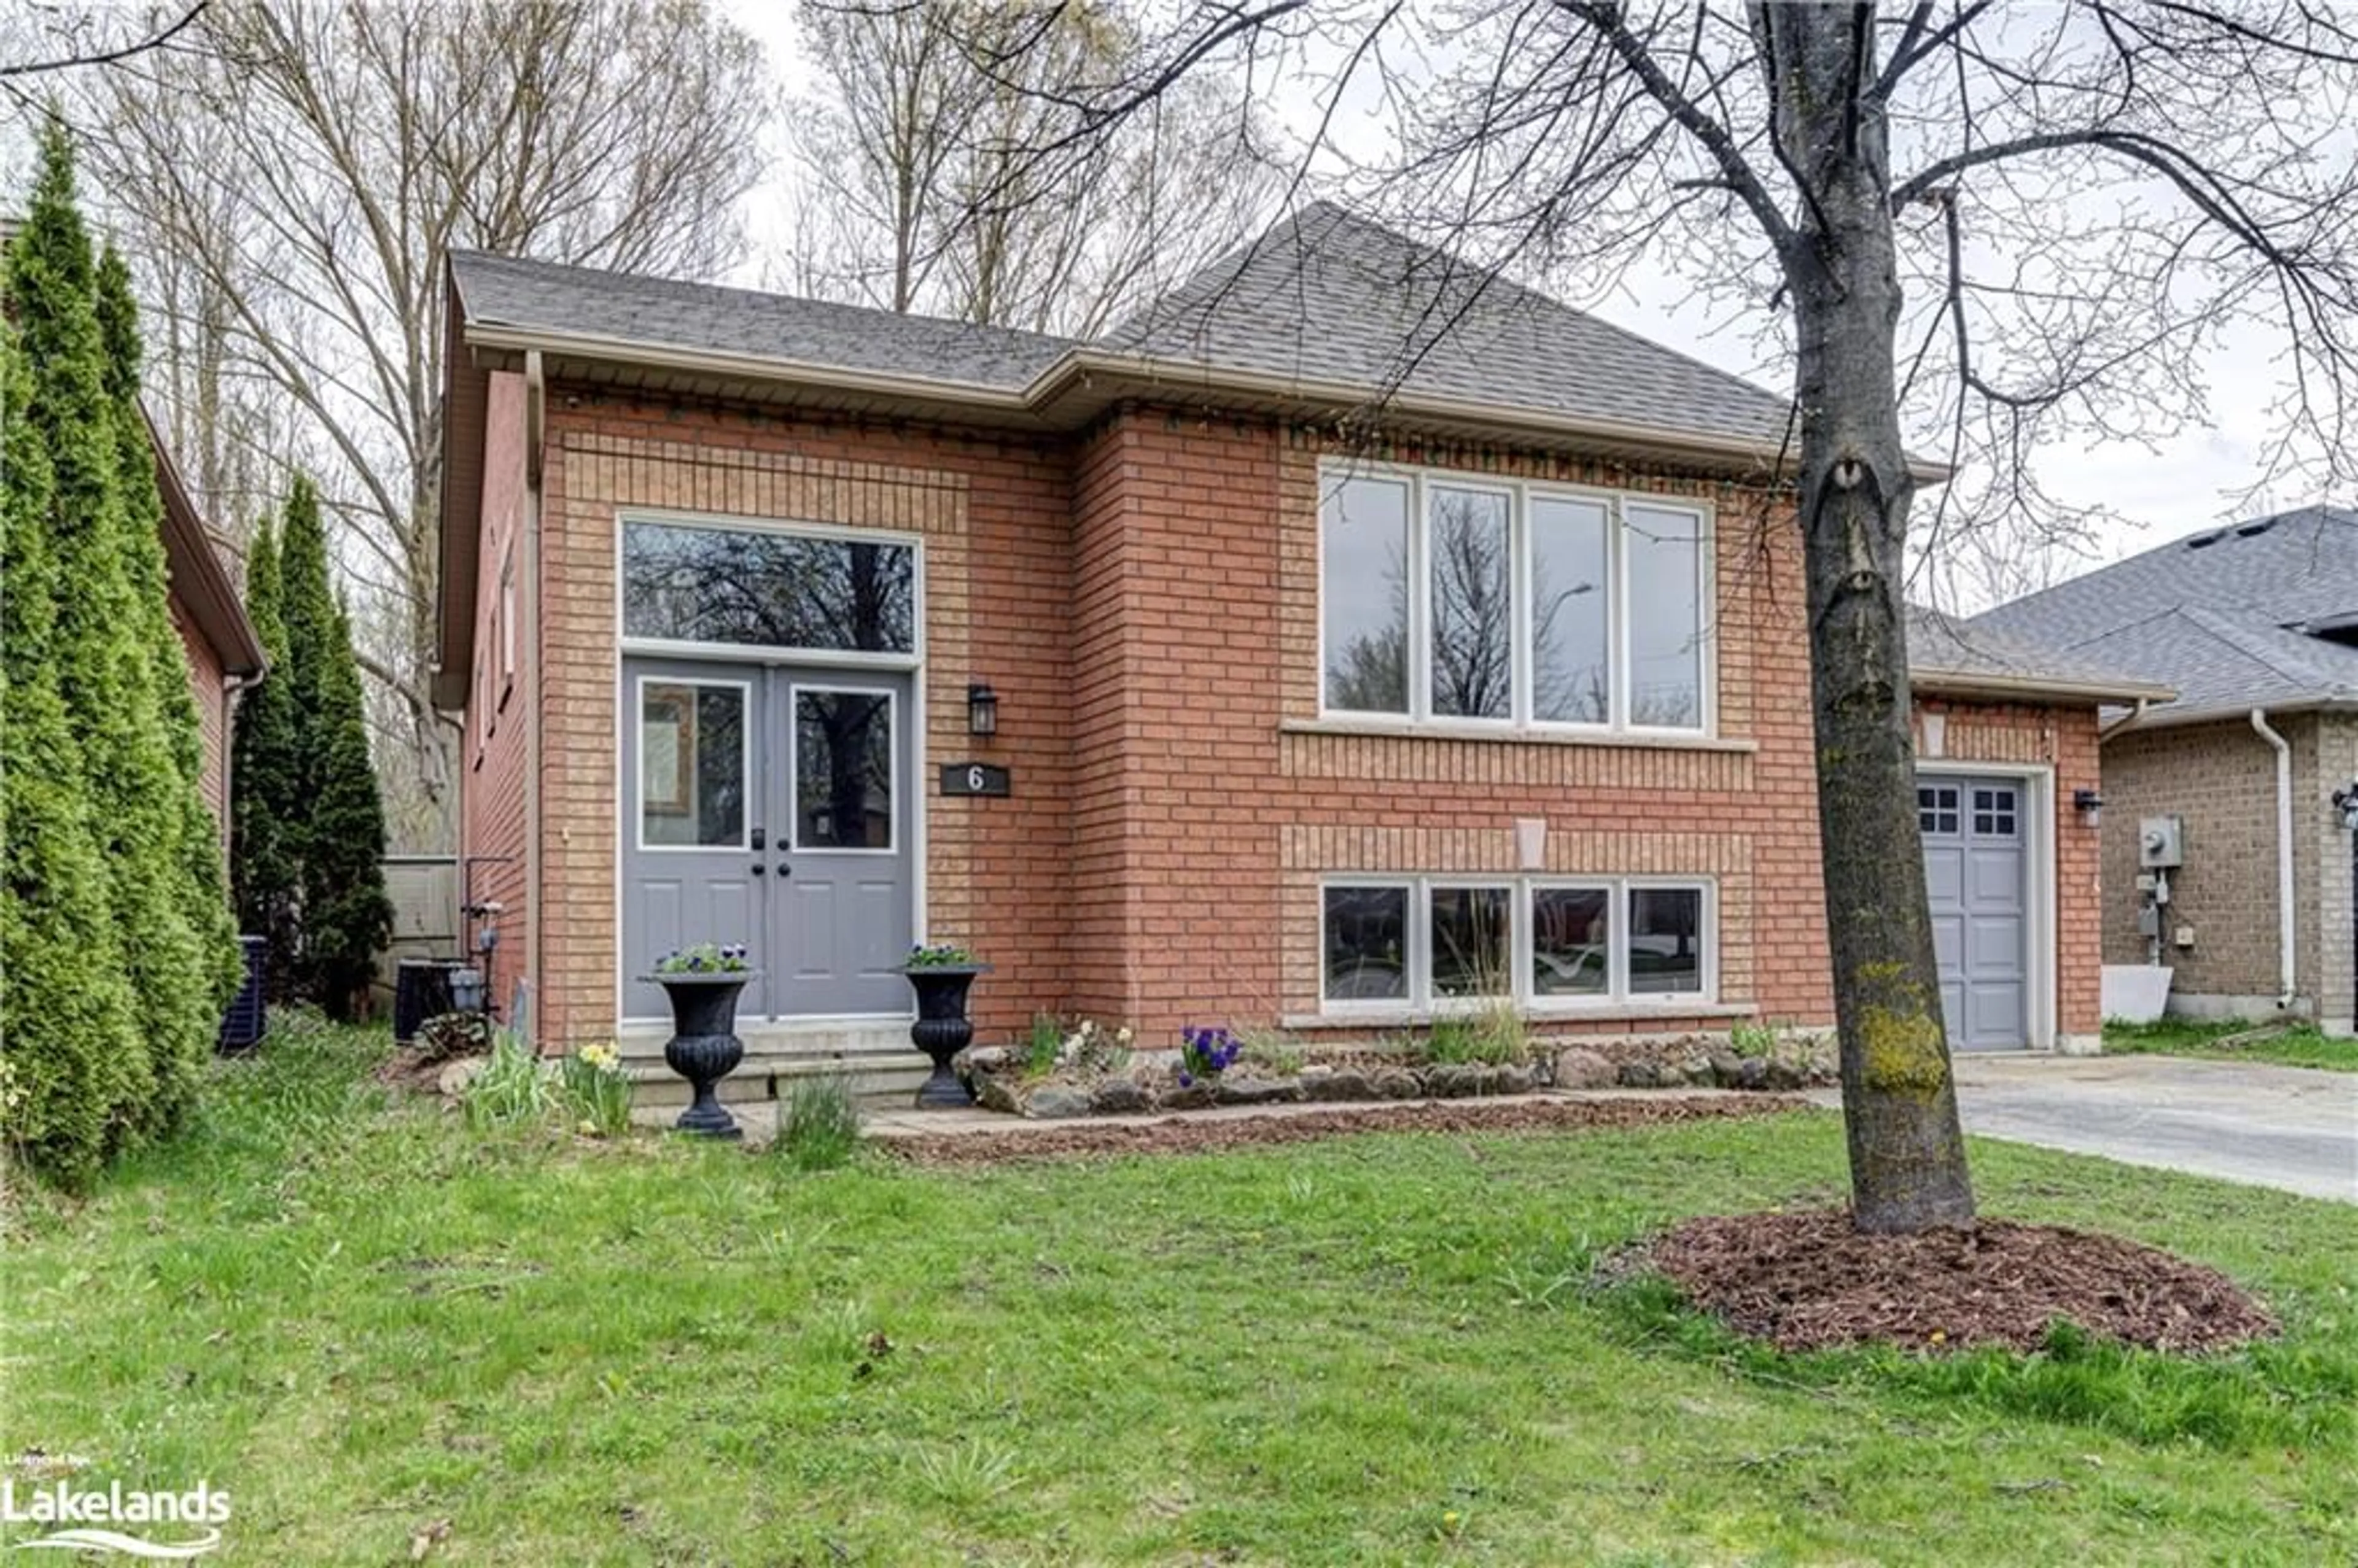 Home with brick exterior material for 6 Telfer Rd, Collingwood Ontario L9Y 4T6